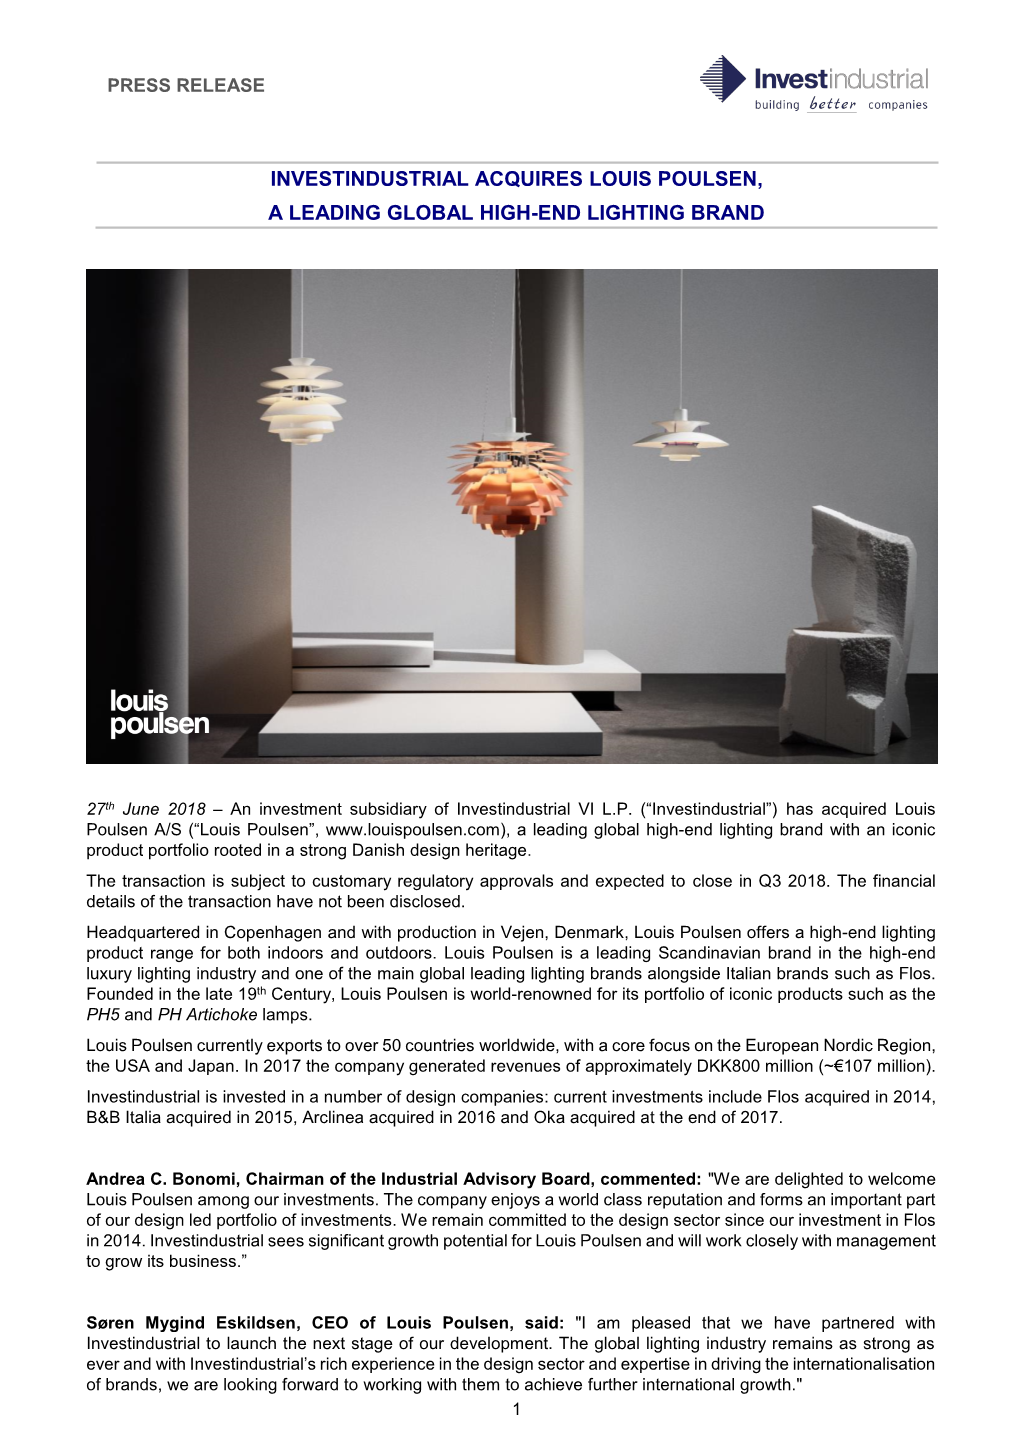 Investindustrial Acquires Louis Poulsen, a Leading Global High-End Lighting Brand